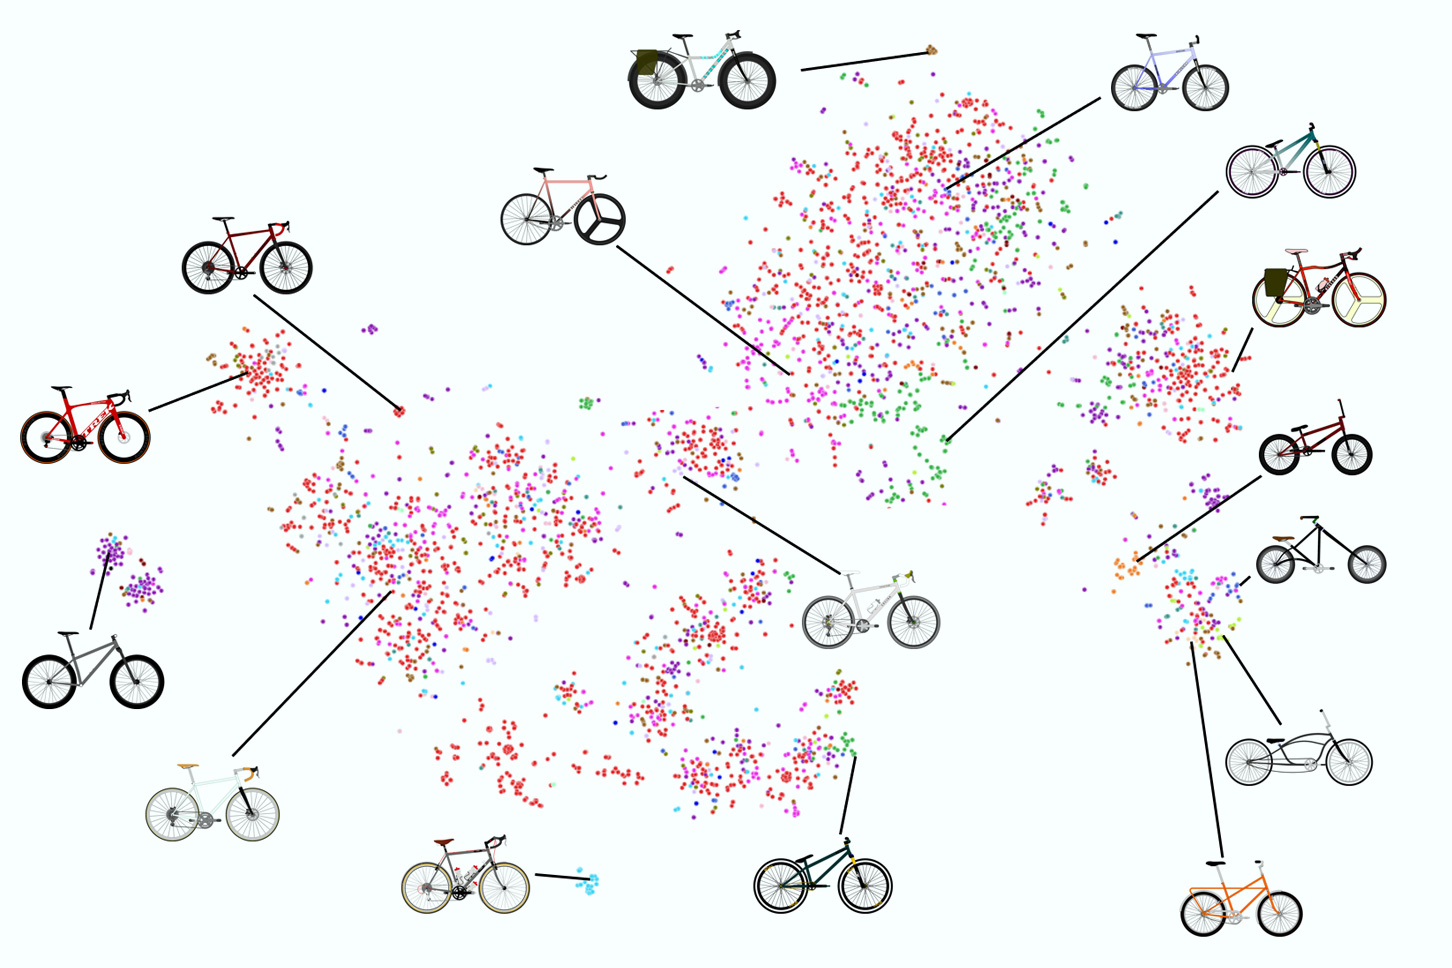 MIT engineers trained several AI models on thousands of bicycle frames, sourced from a dataset of full bicycle designs, shown here color-coded by bike style.